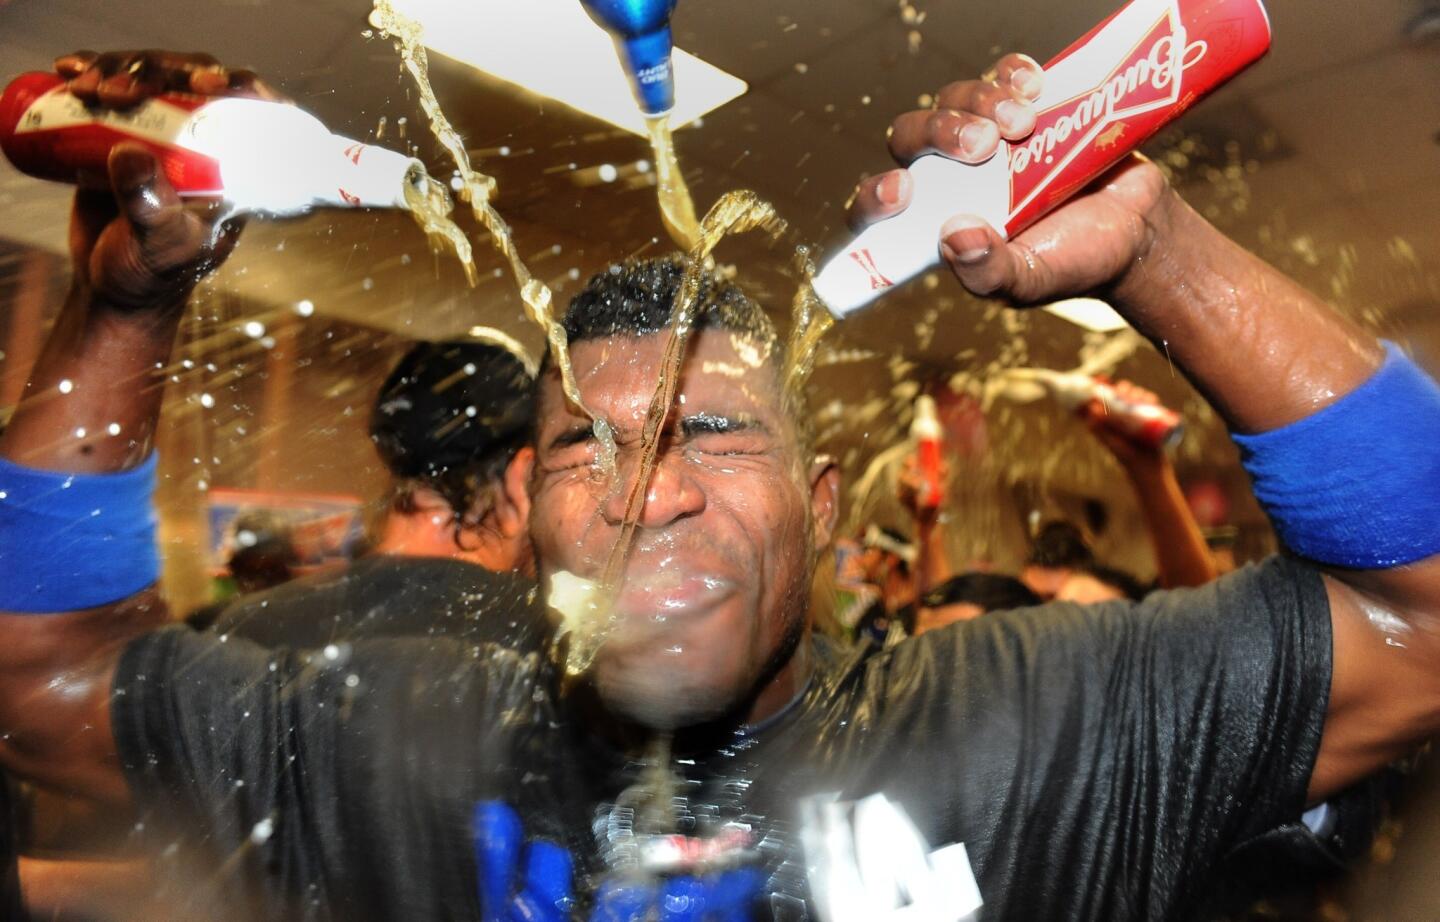 Dodgers rookie right fielder Yasiel Puig is drenched during the team's clubhouse celebration following their 7-6 victory over the Arizona Diamondbacks that clinched a playoff spot.